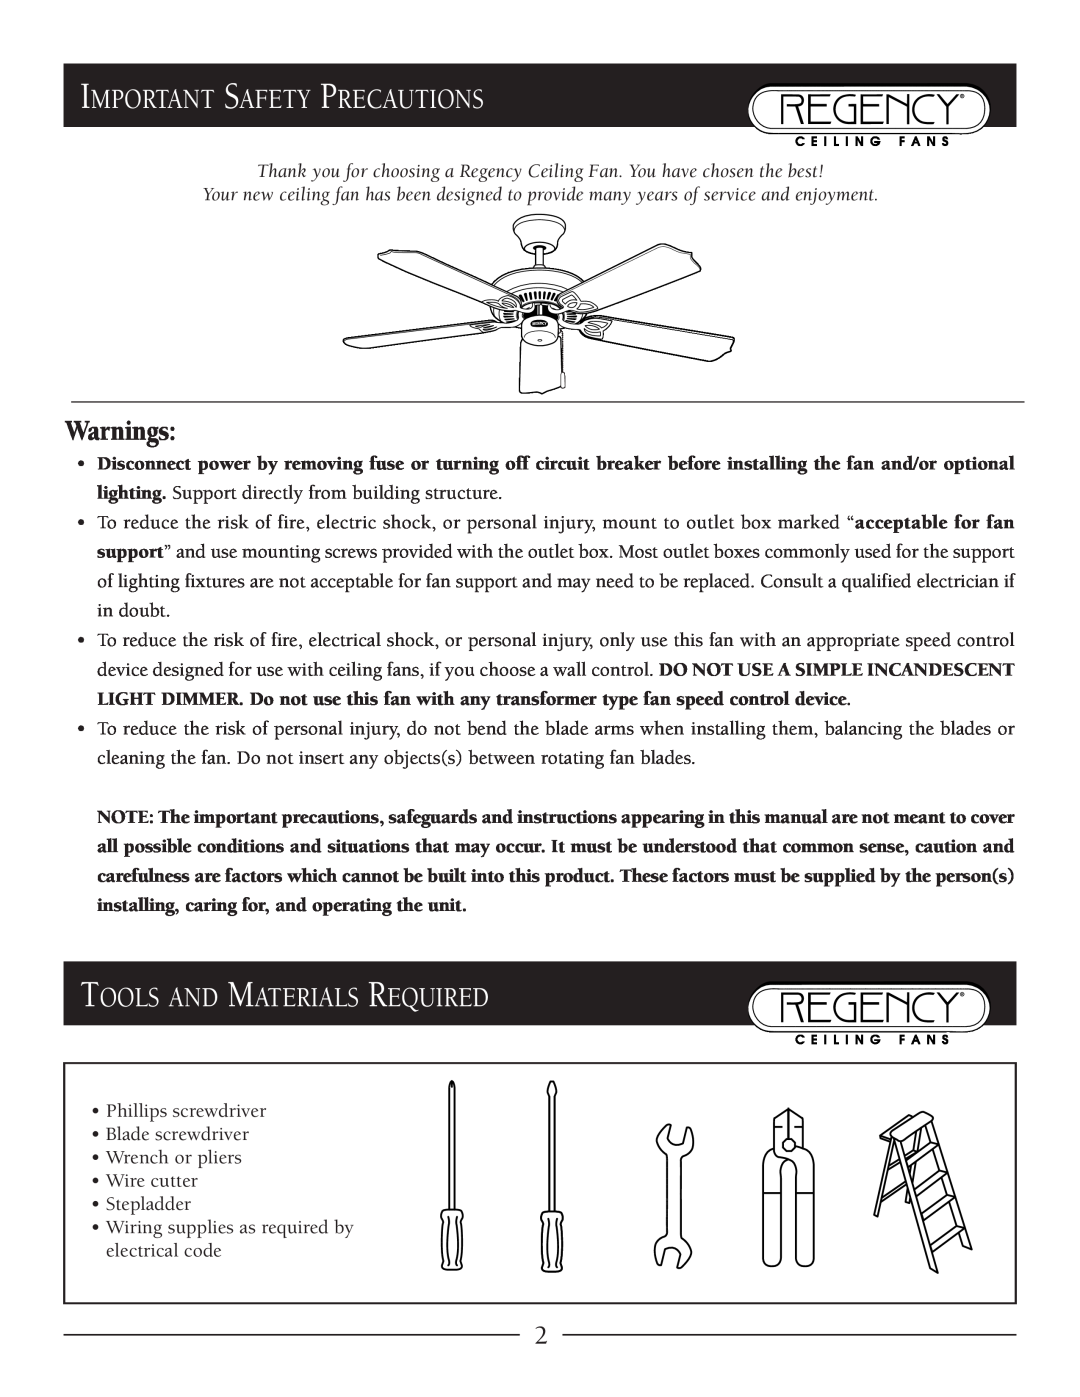 Marquis SERIES owner manual Important Safety Precautions, Tools And Materials Required, Warnings 